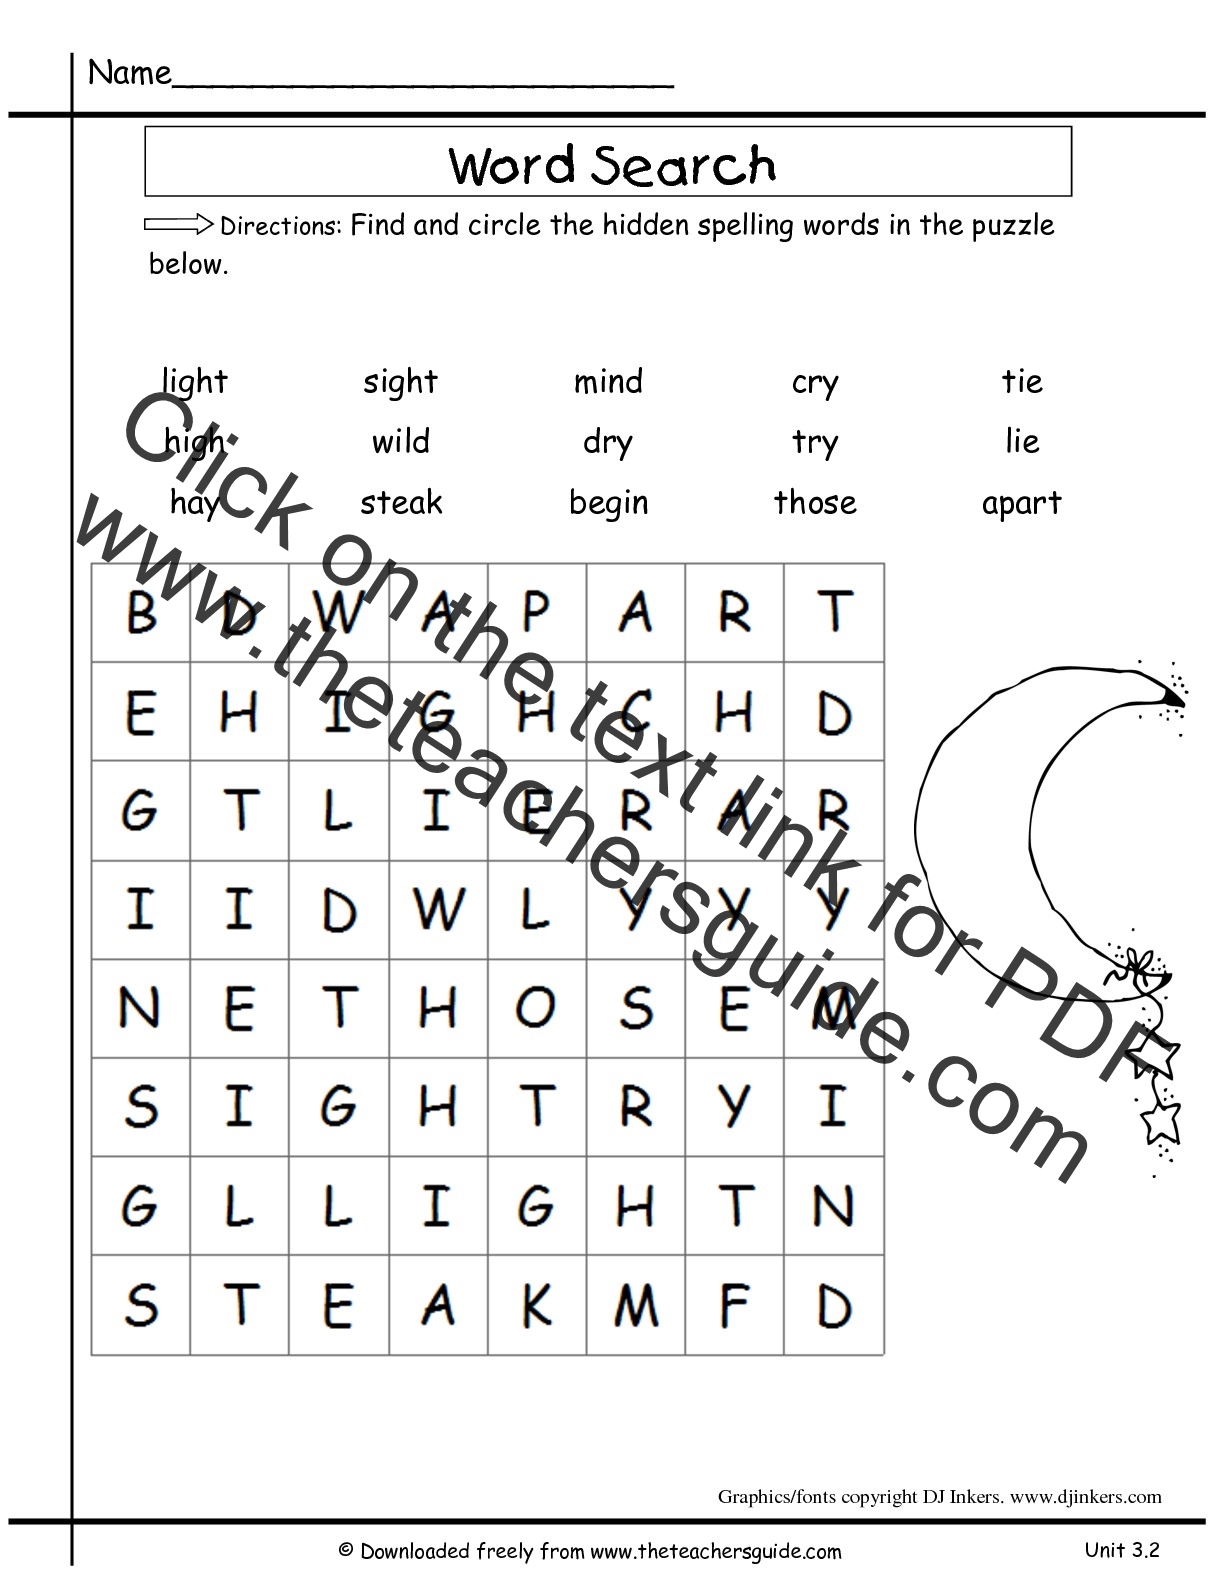 spelling  for spelling sight wordsearch 2nd words words activities word grade with wordsearch